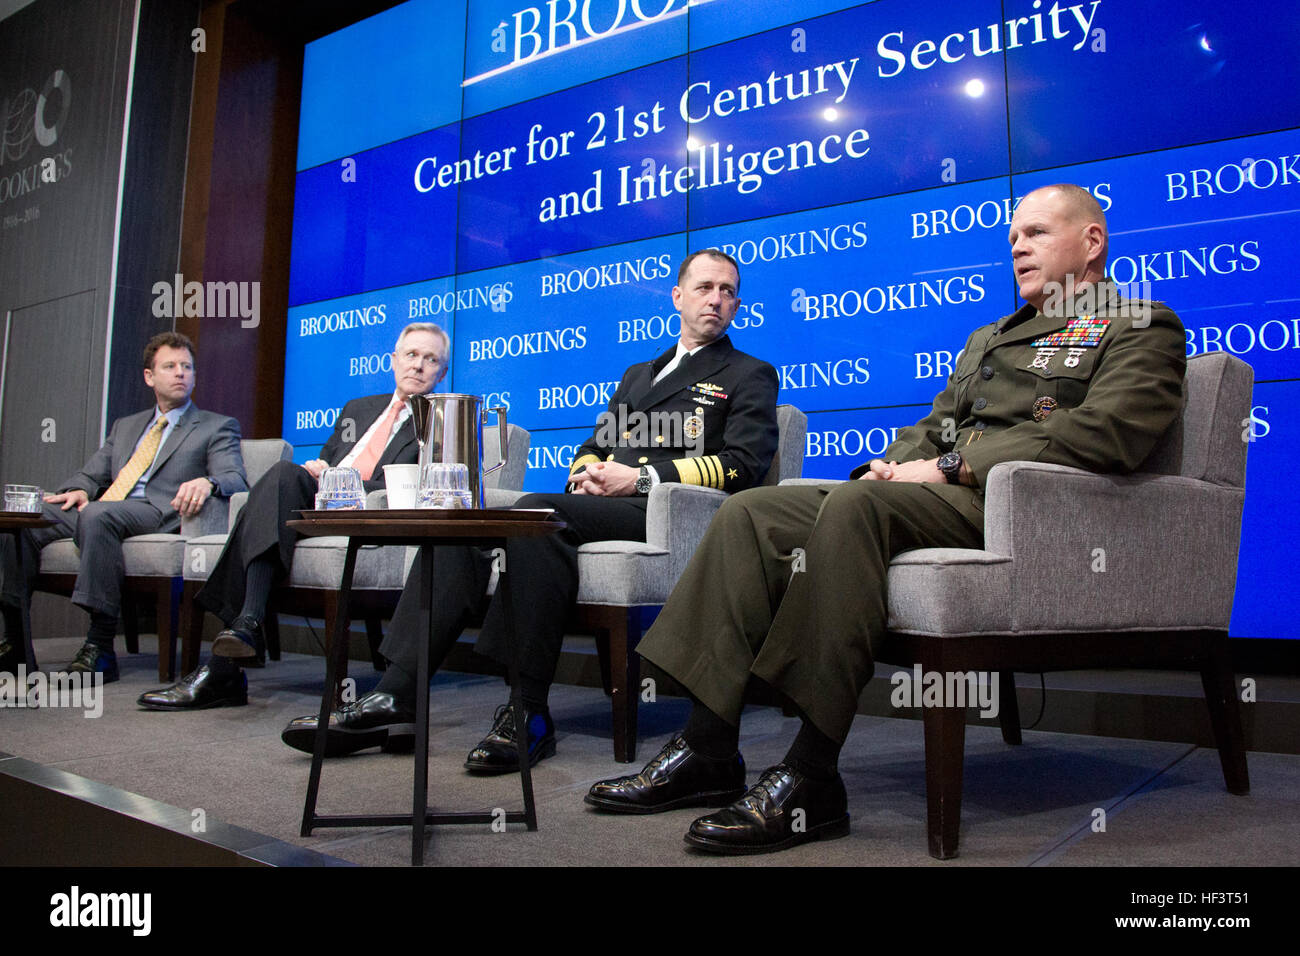 From left, Michael O'Hanlon, Secretary of the Navy Ray Mabus, and Chief of Naval Operations Adm. John M. Richardson listen to Commandant of the Marine Corps Gen. Robert B. Neller, during an event with the Center for 21st Century Security and Intelligence at the Brookings Institution, Washington, D.C., Feb. 26, 2016. Mabus, Richardson, and Neller discussed the future maritime concepts, strategies and technologies with O'Hanlon as the moderator. (U.S. Marine Corps photo by Staff Sgt. Gabriela Garcia/Released) CMC at Brookings 160226-M-SA716-017 Stock Photo